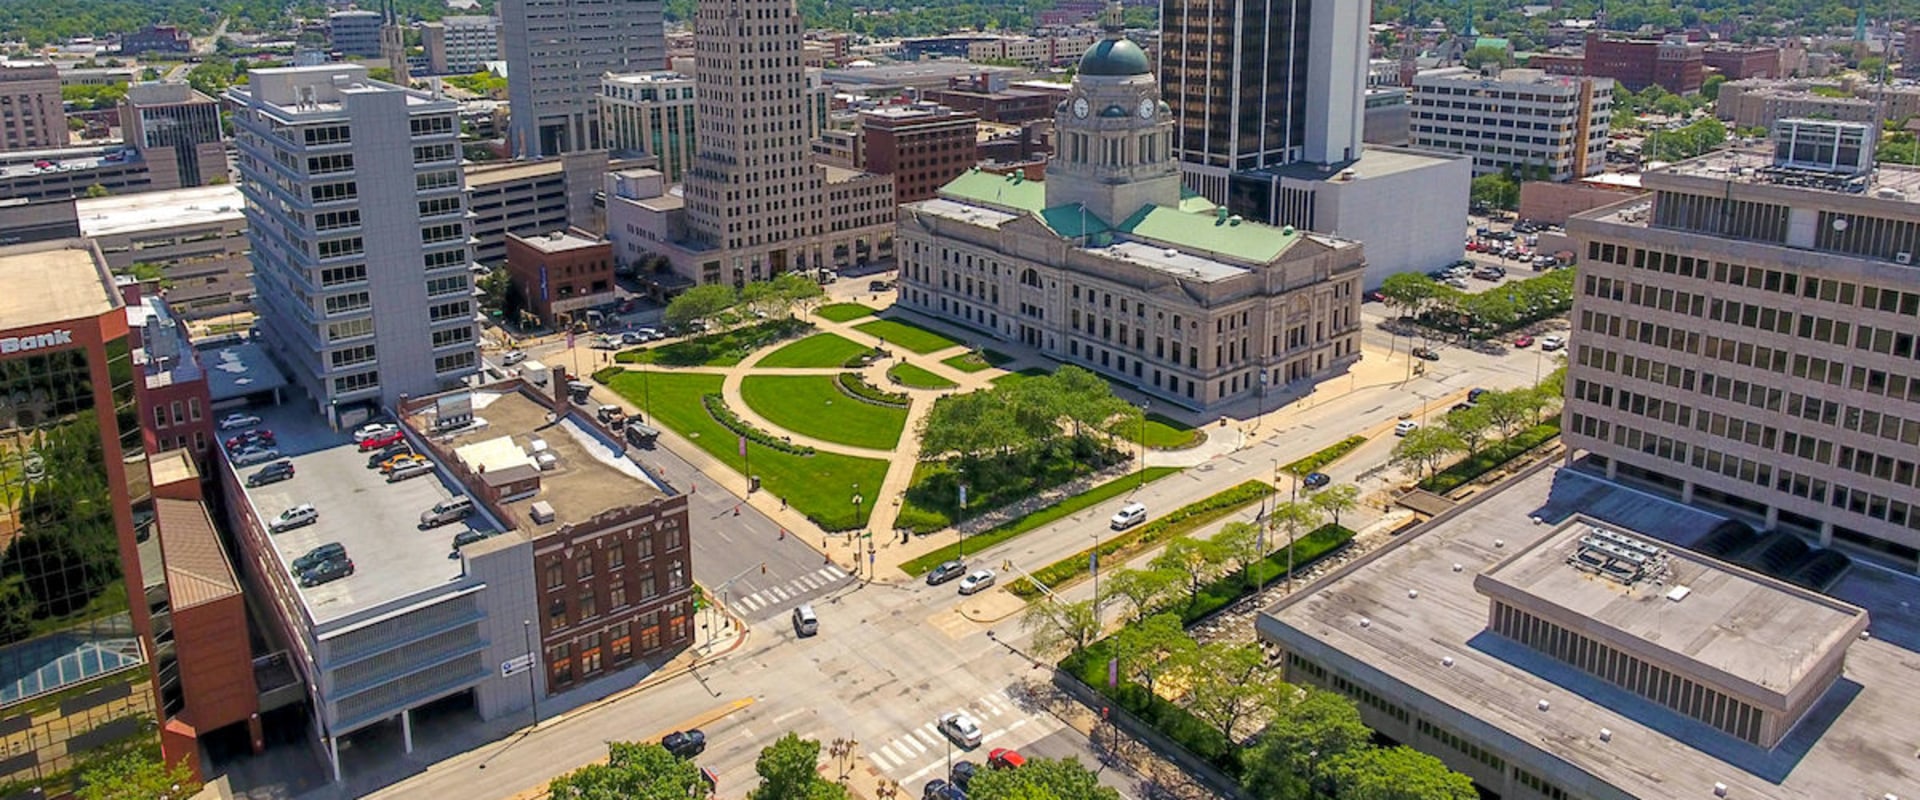 Is fort wayne indiana a good place to live?